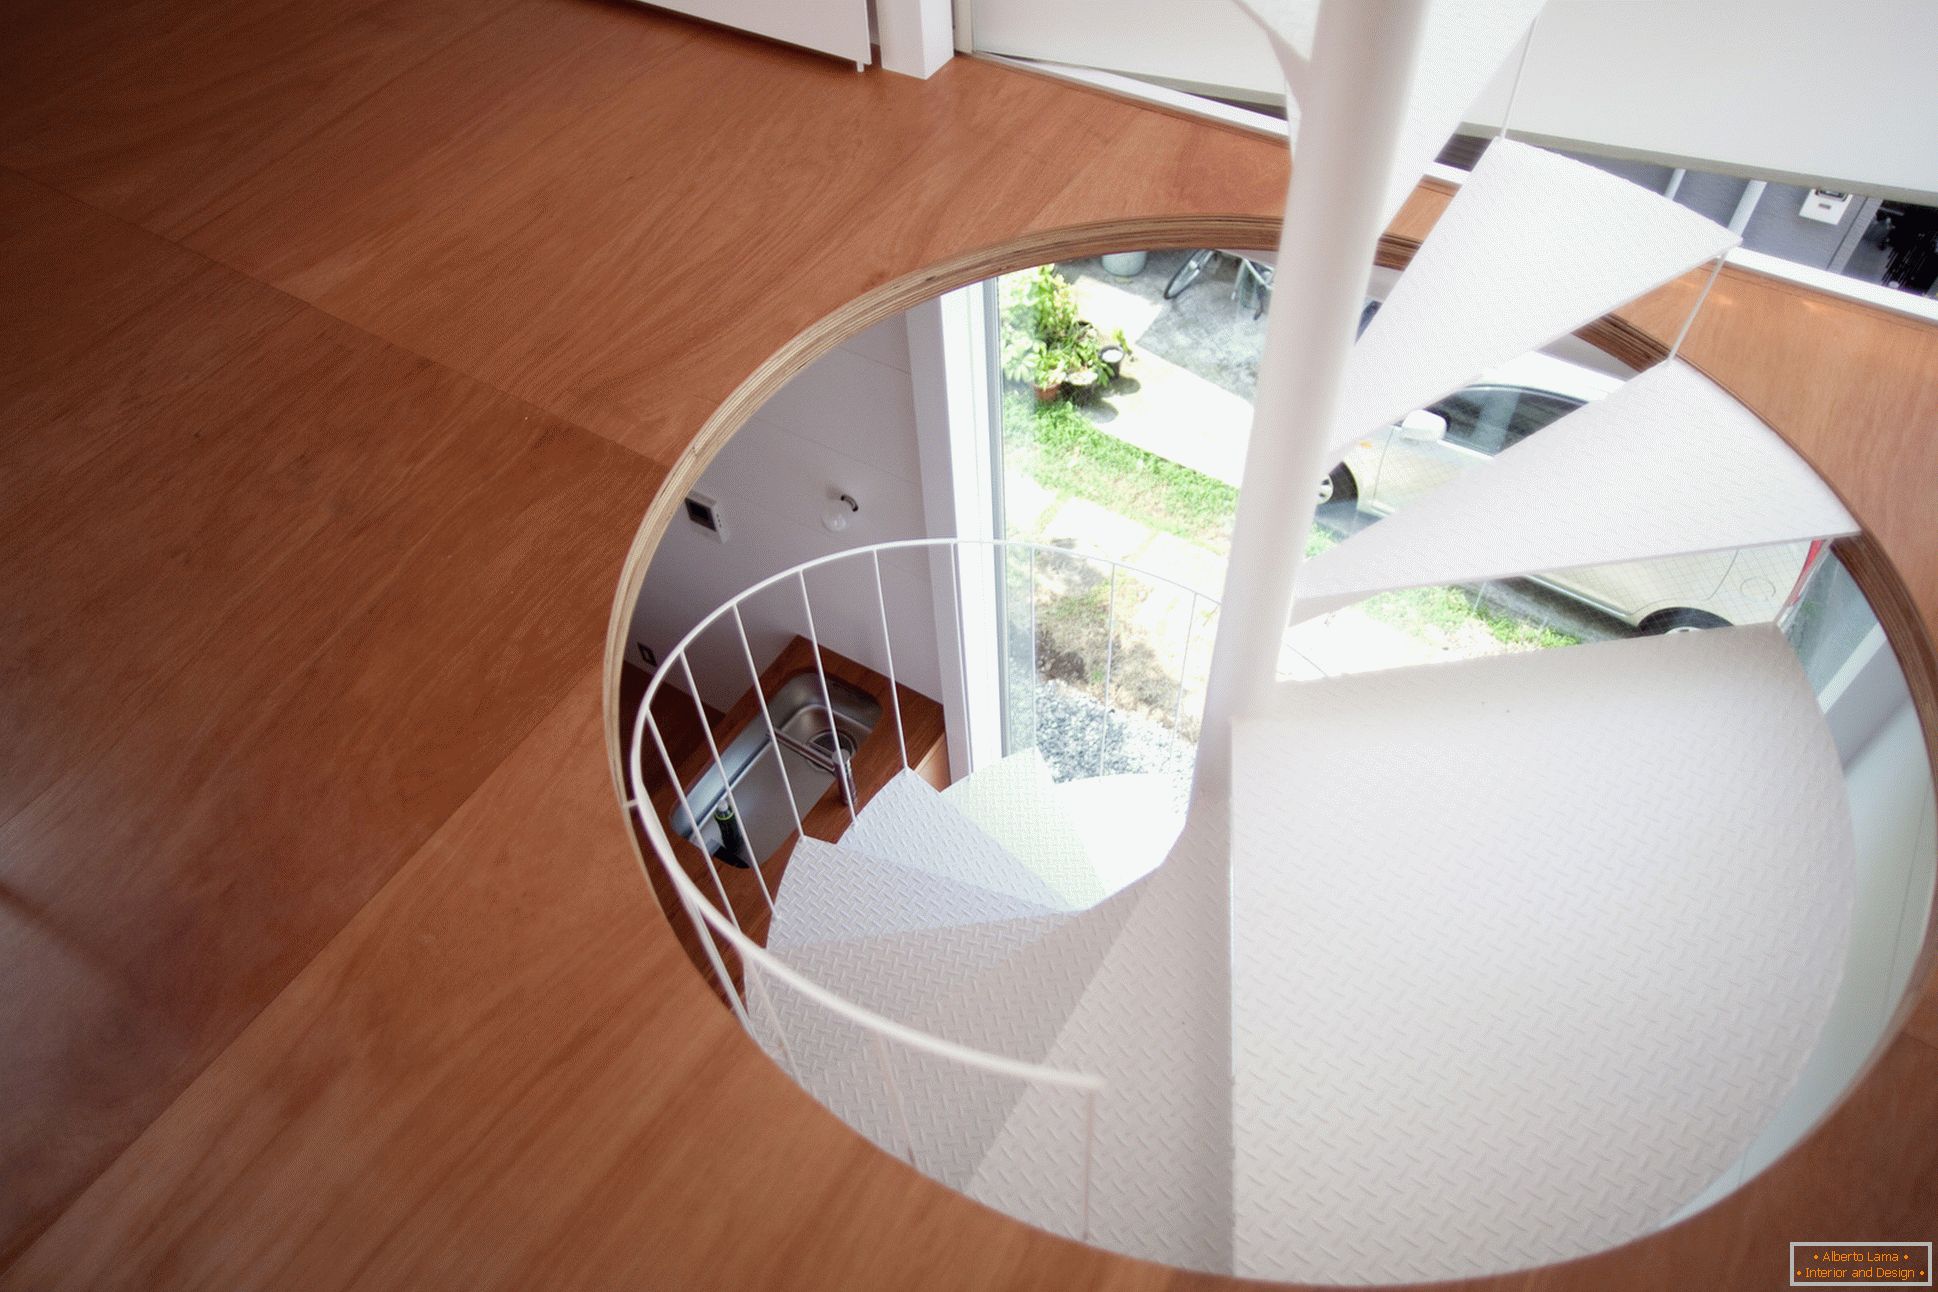 Spiral staircase in a compact house